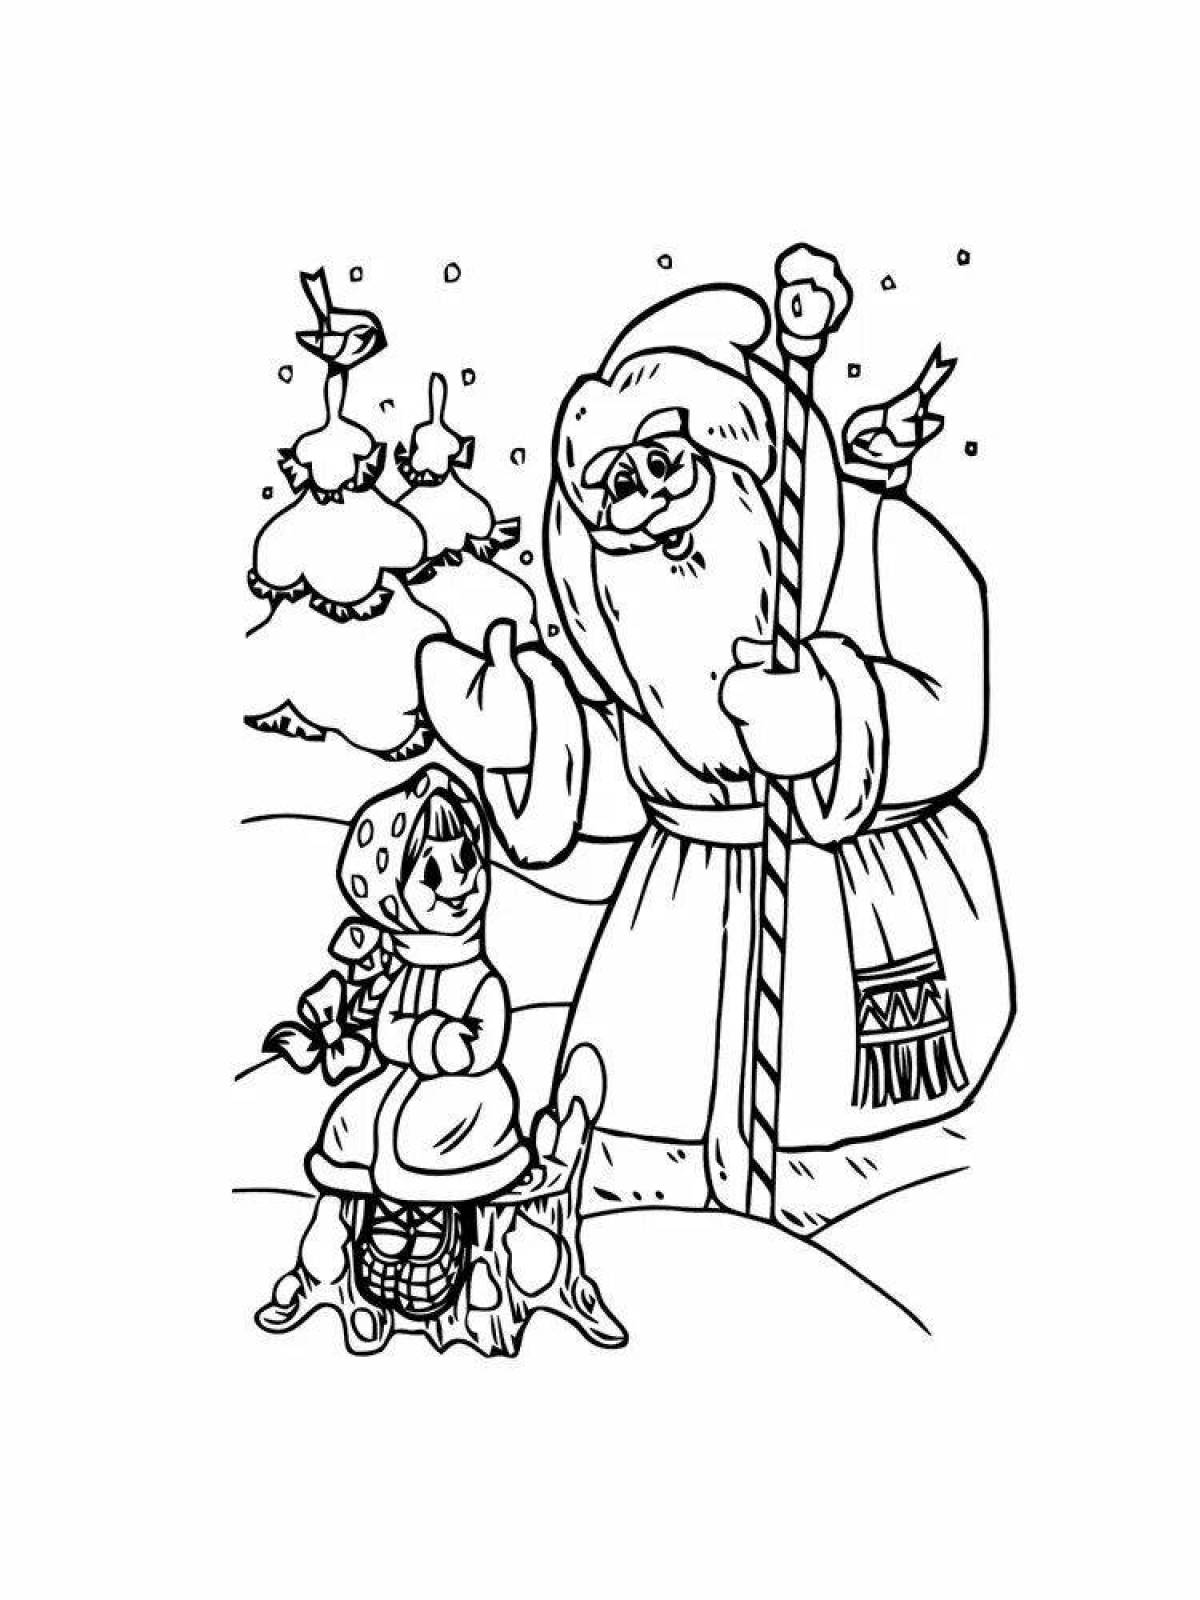 Coloring page sublime odoevsky frost ivanovich